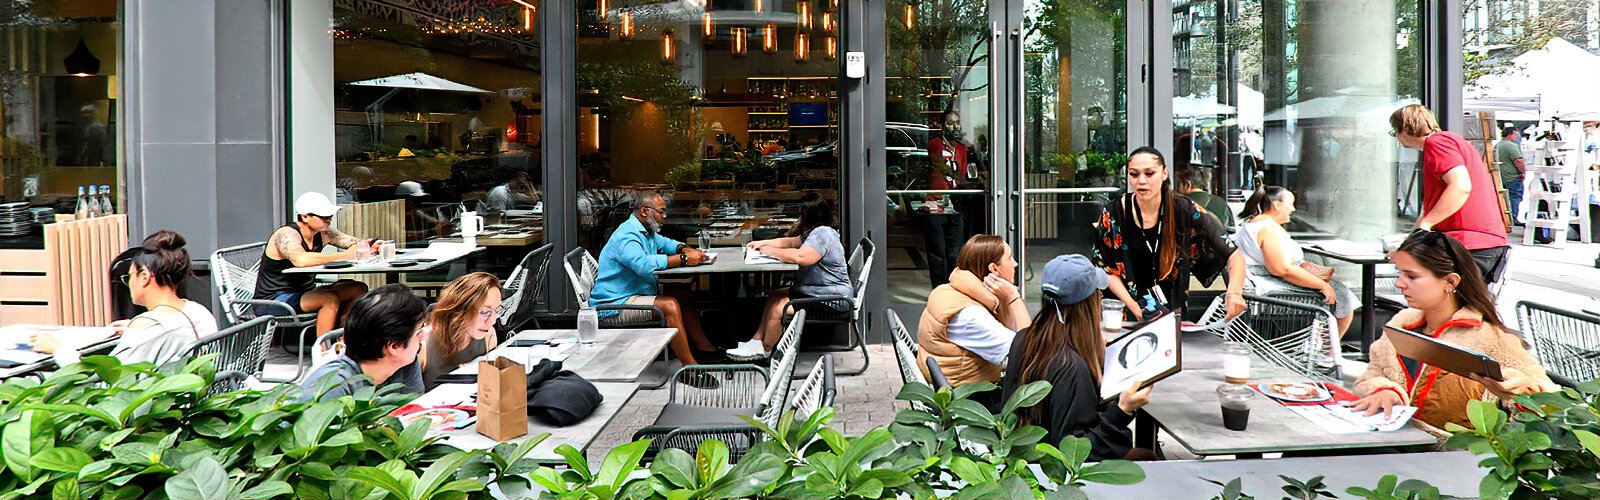 Great weather entices diners to the inviting patio of Wagamama, an iconic restaurant brand that offers modern Asian cuisine and opted for Water Street Tampa as their first ever Florida location.